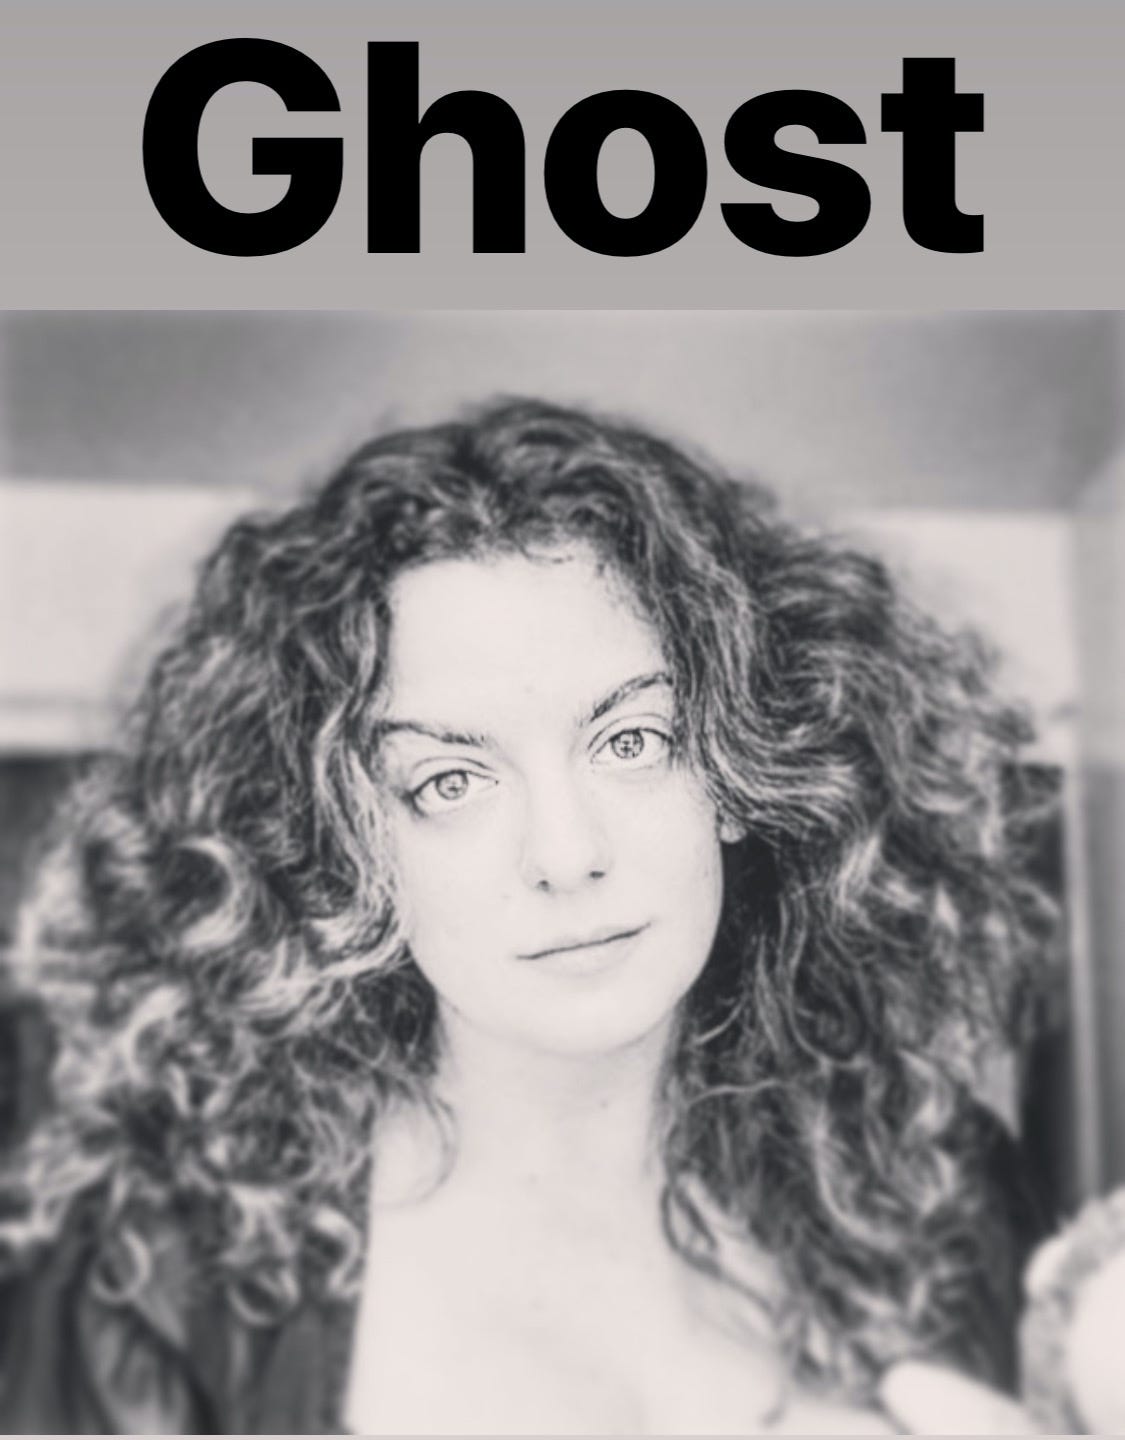 Women with curly hair in a black and white photo with blown-out lighting and the header "Ghost"